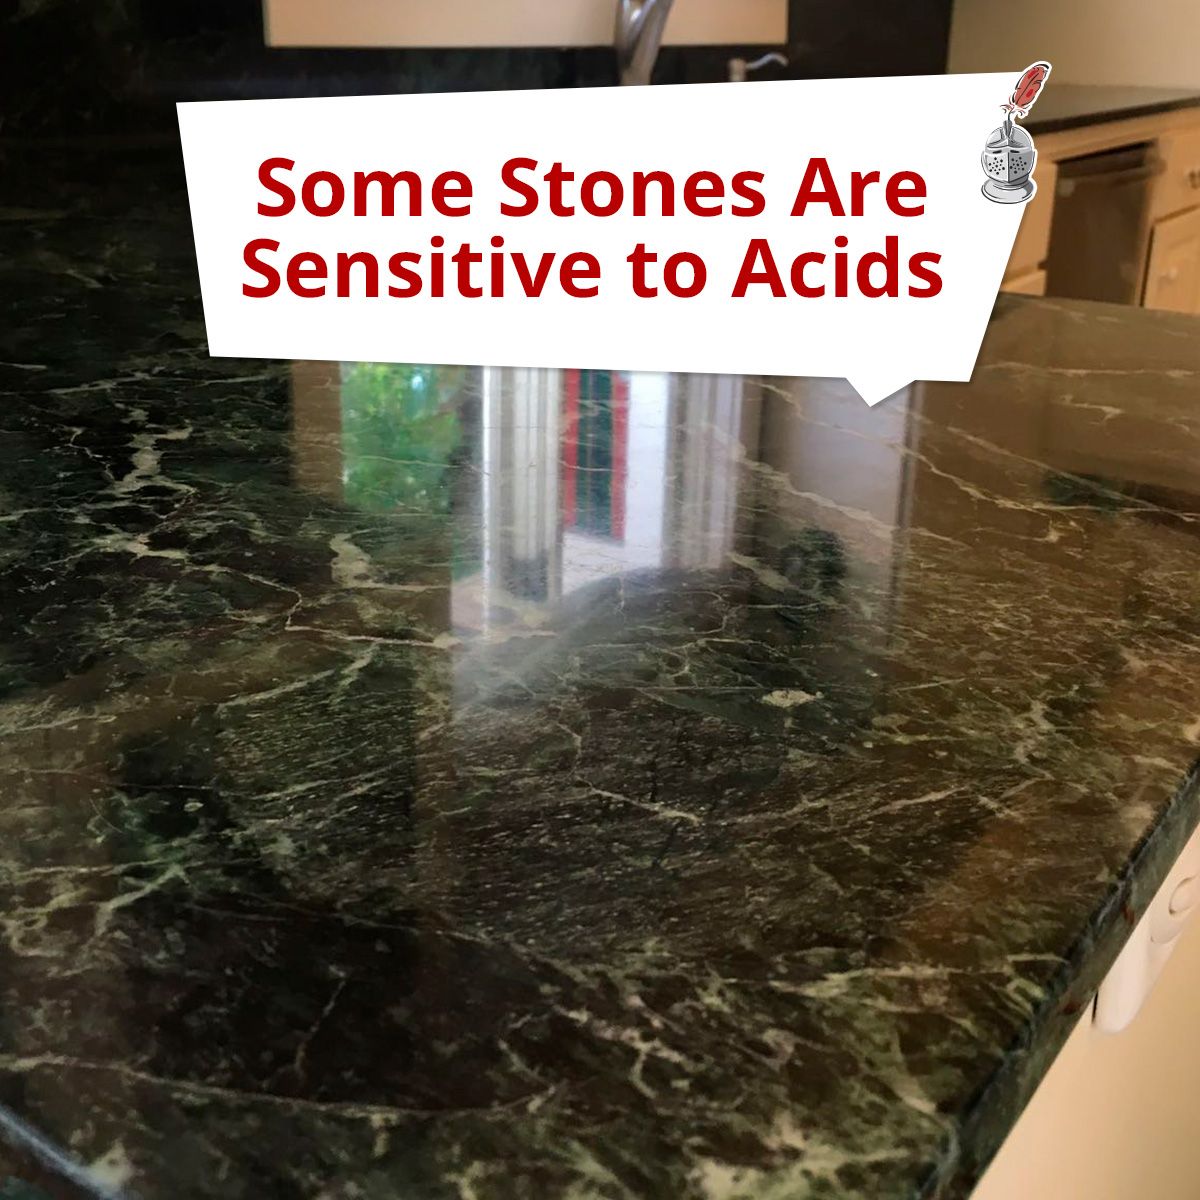 Some Stones Are Sensitive to Acids